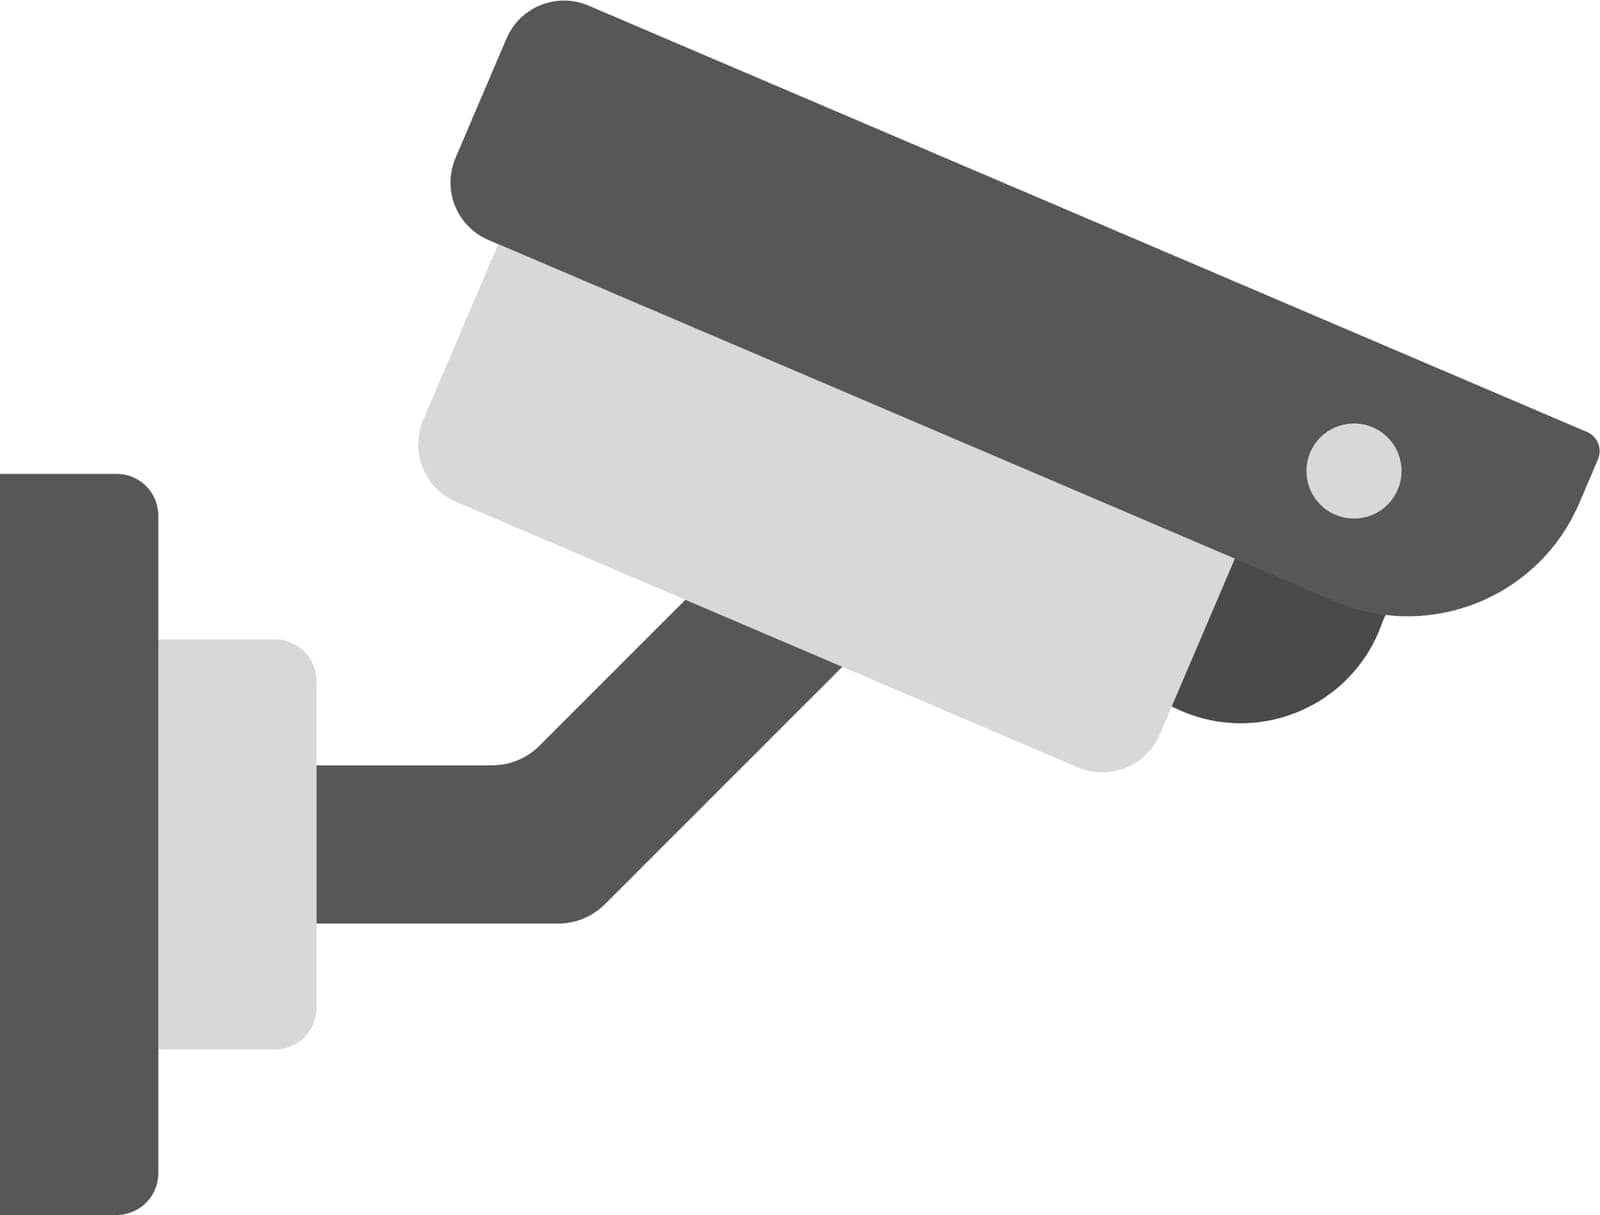 Security Camera icon vector image. Suitable for mobile application web application and print media.